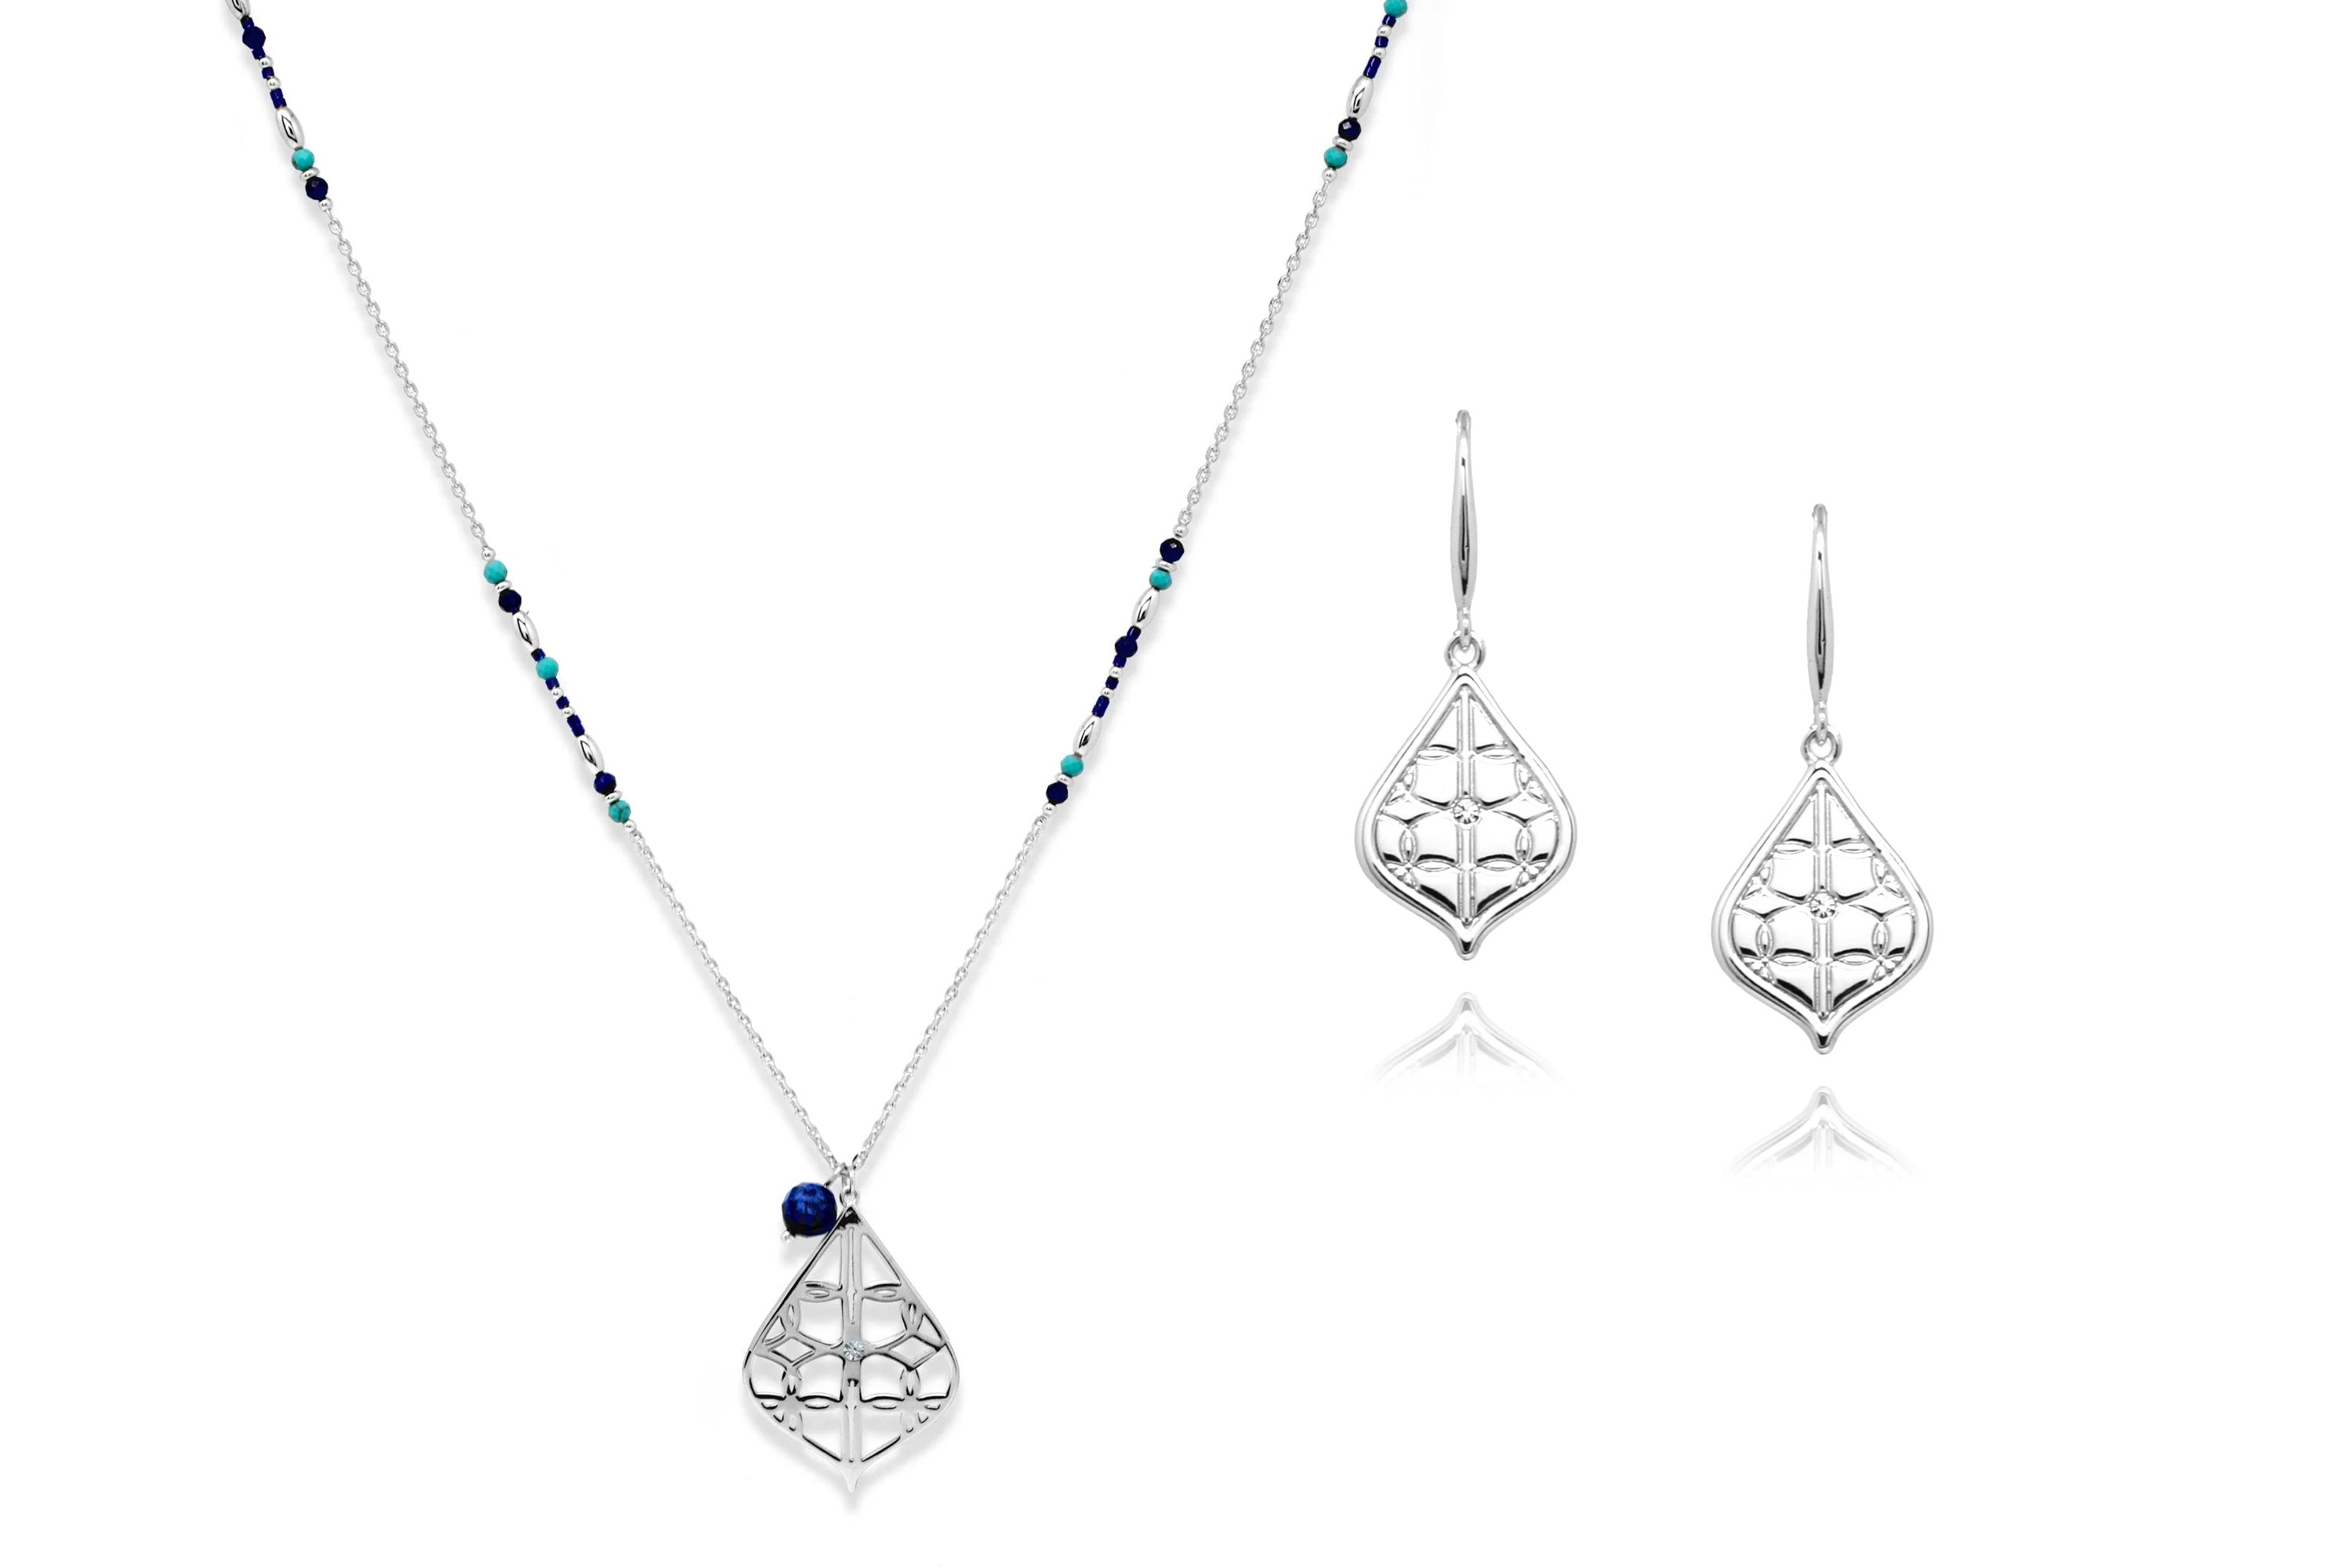 Ratri Necklace & Earring Gift Set